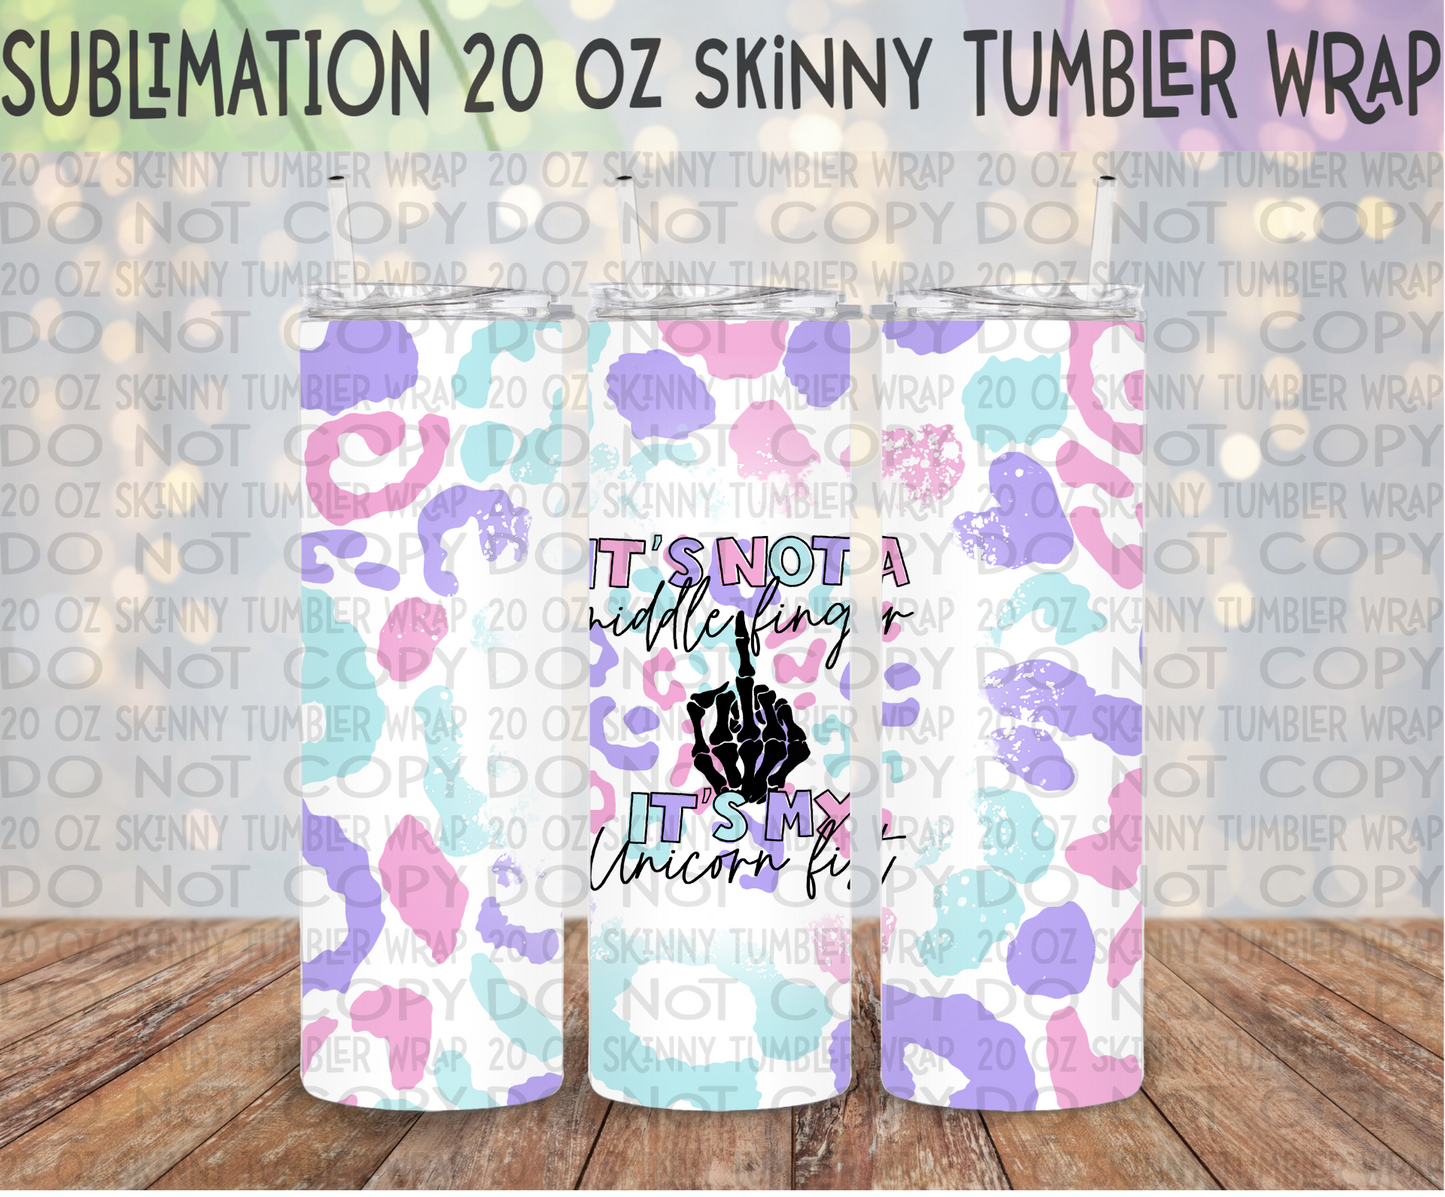 It's Not a Middle Finger, It's My Unicorn Fist 20 Oz Skinny Tumbler Wrap - Sublimation Transfer - RTS